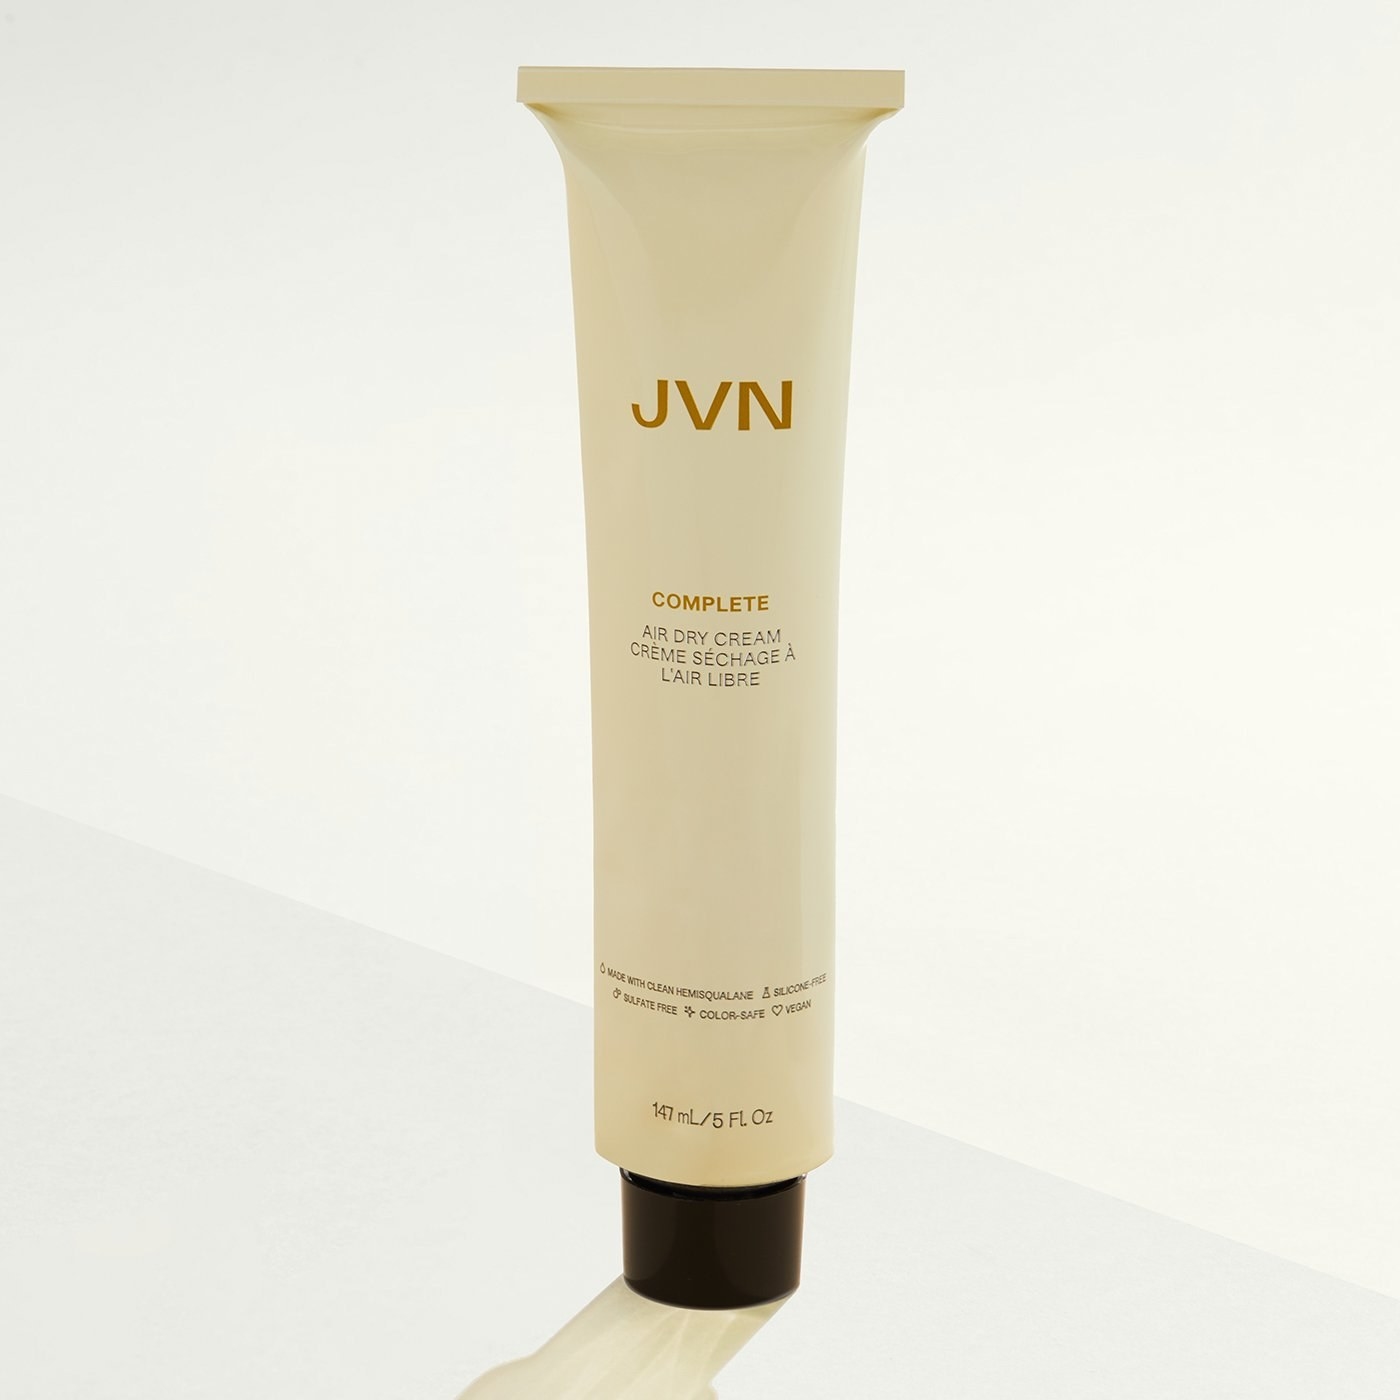 JVN Hair yellow tube of Complete Air Dry Cream